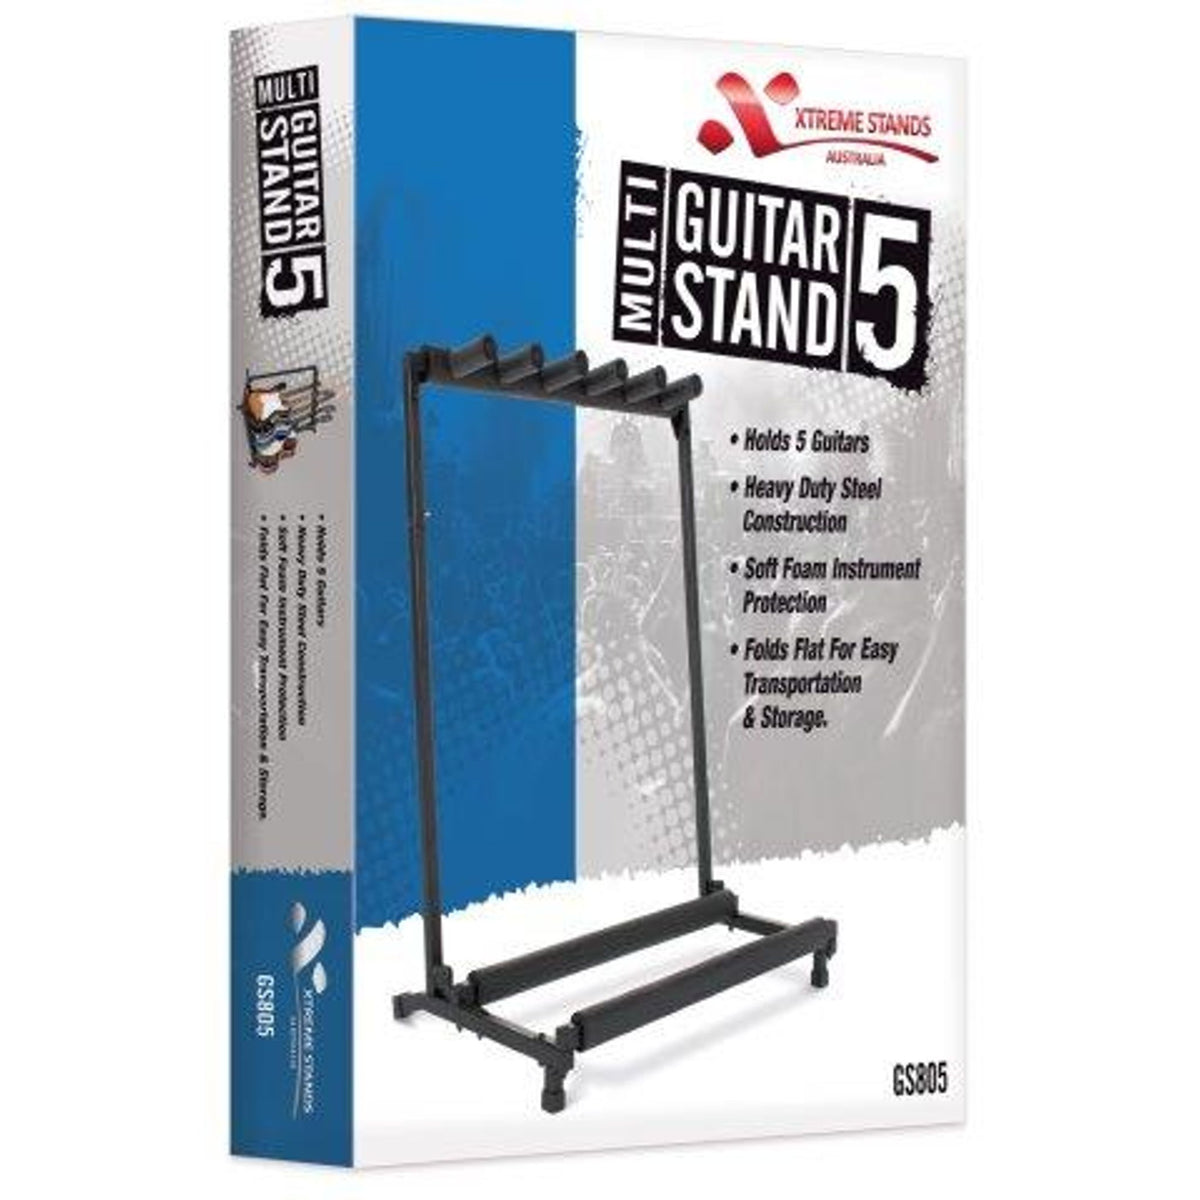 Xtreme Multi Guitar Stand 5